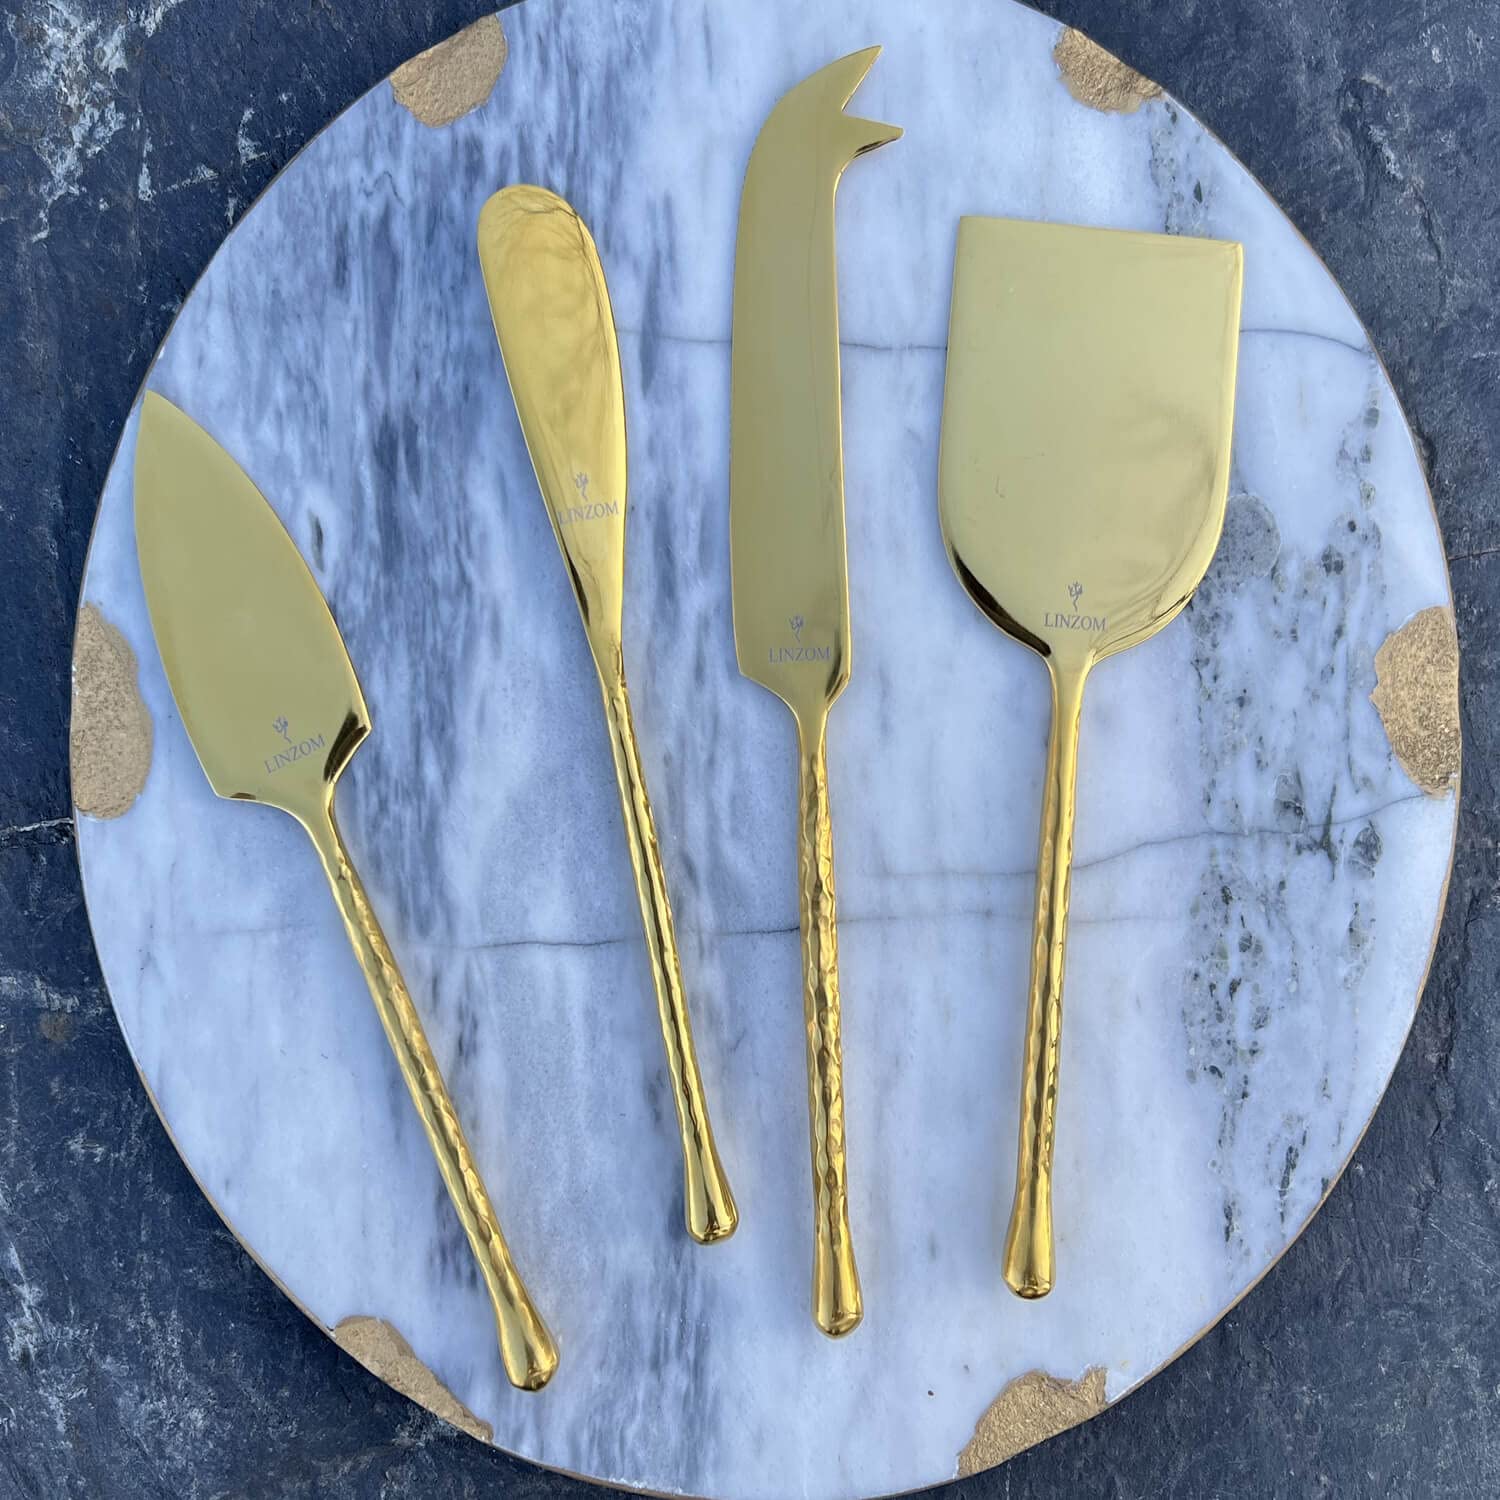 LINZOM Gold Cheese Knives, Cheese Knife Set for Charcuterie Board, Hand Forged Charcuterie Utensils 4PCS, House Warming Gift New Home, Wedding Gifts, Bridal Shower Gift for Women